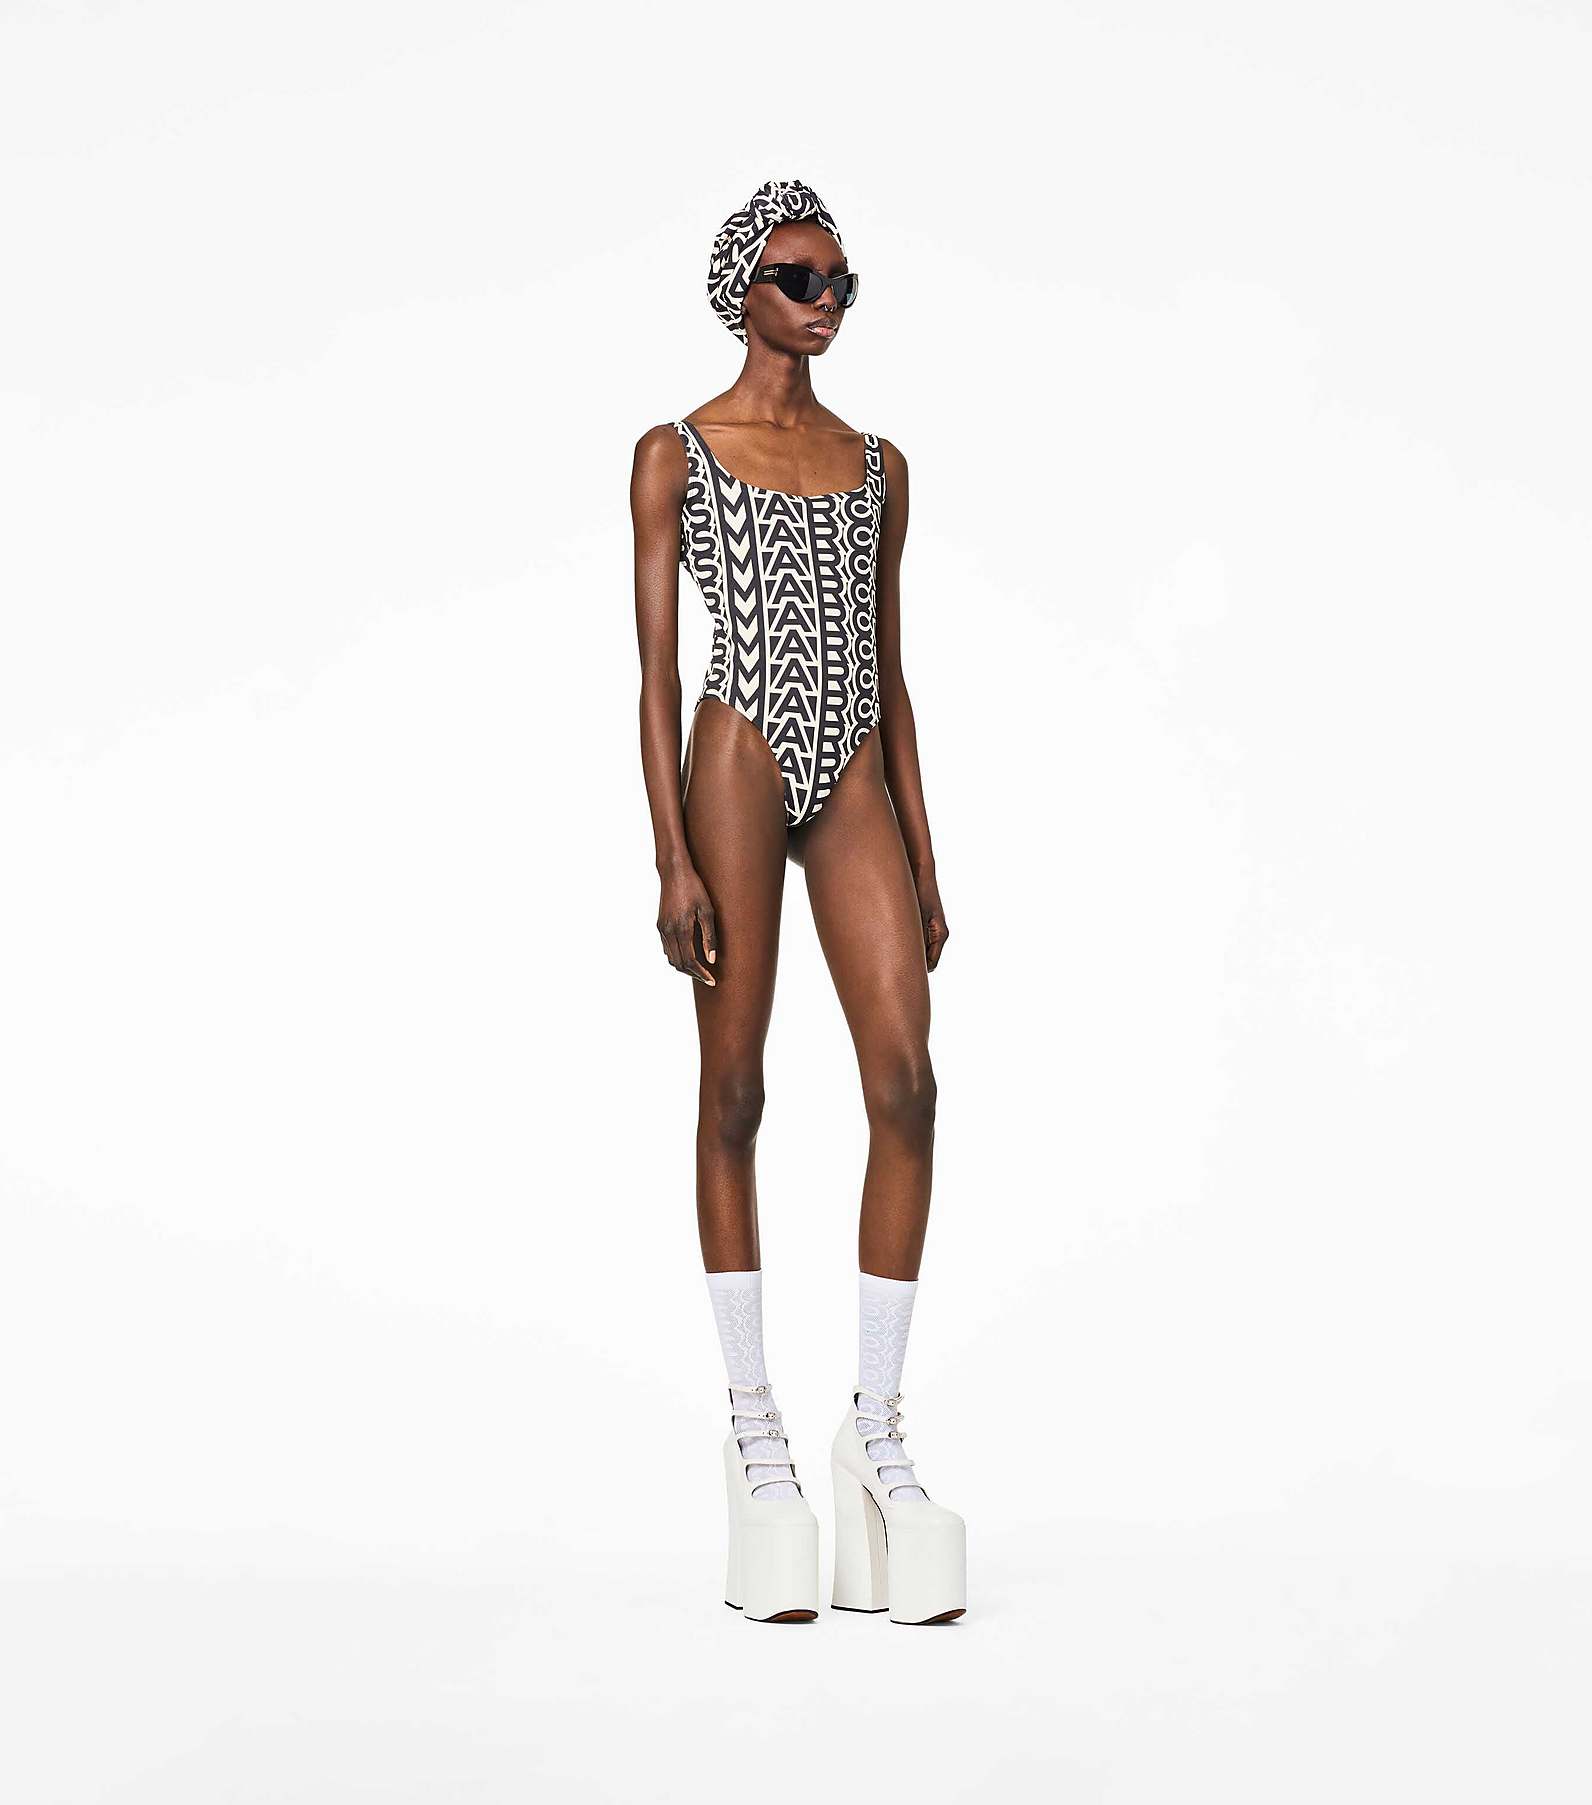 The Monogram One-Piece Swimsuit(The Monogram Collection)